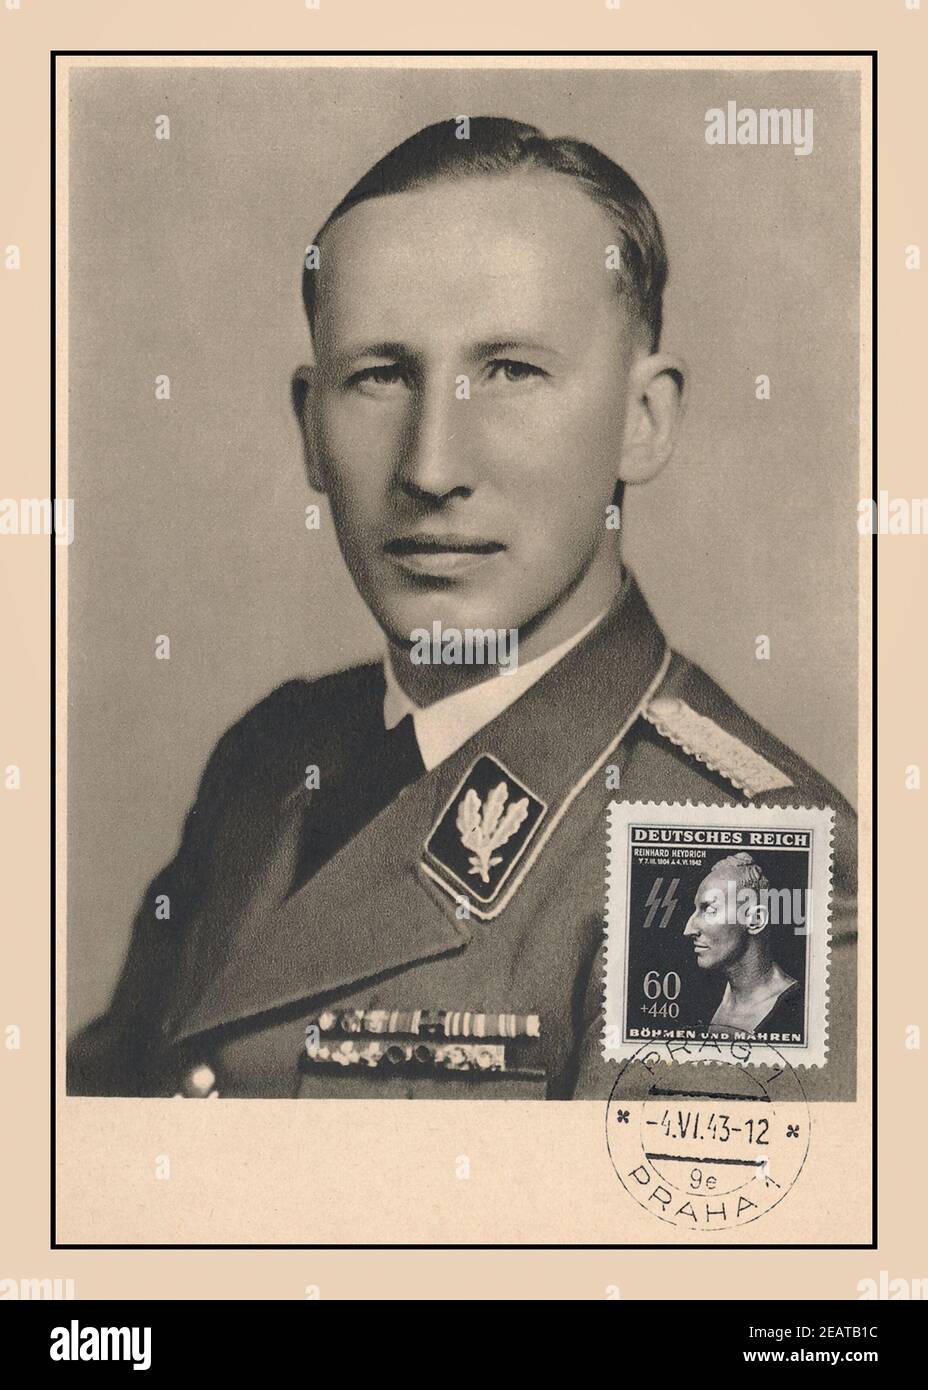 HEYDRICH 1943, WW2 portrait of senior Nazi Waffen SS-Obergruppenführer Reinhard Heydrich, a brutal fervent Nazi, responsible for countless war crimes. A favourite of Adolf Hitler. Subsequent commemorative card with his death mask used as a stamp after his very timely brave assasination in Prague Czechoslovakia World War II Reinhard Tristan Eugen Heydrich was a high-ranking German SS and police official during Nazi era &/main architect of the Holocaust. He was chief of the Reich Main Security Office, also Stellvertretender Reichsprotektor of Bohemia and Moravia. Second World War World War II Stock Photo